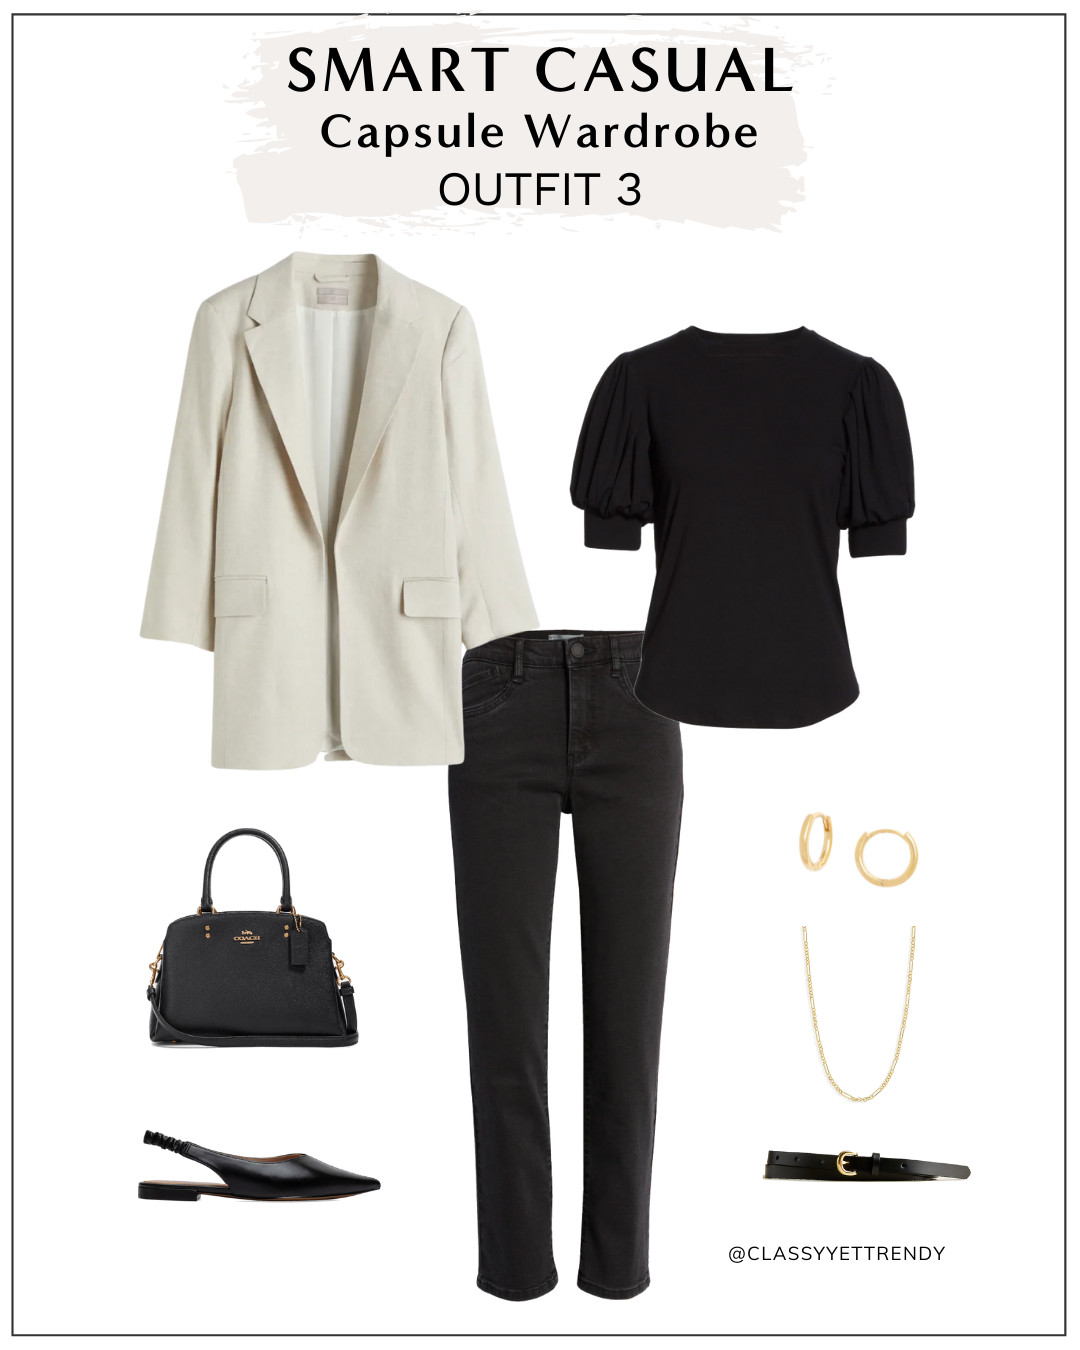 9 Wardrobe Essentials You Need for the New Biz-Casual Workplace